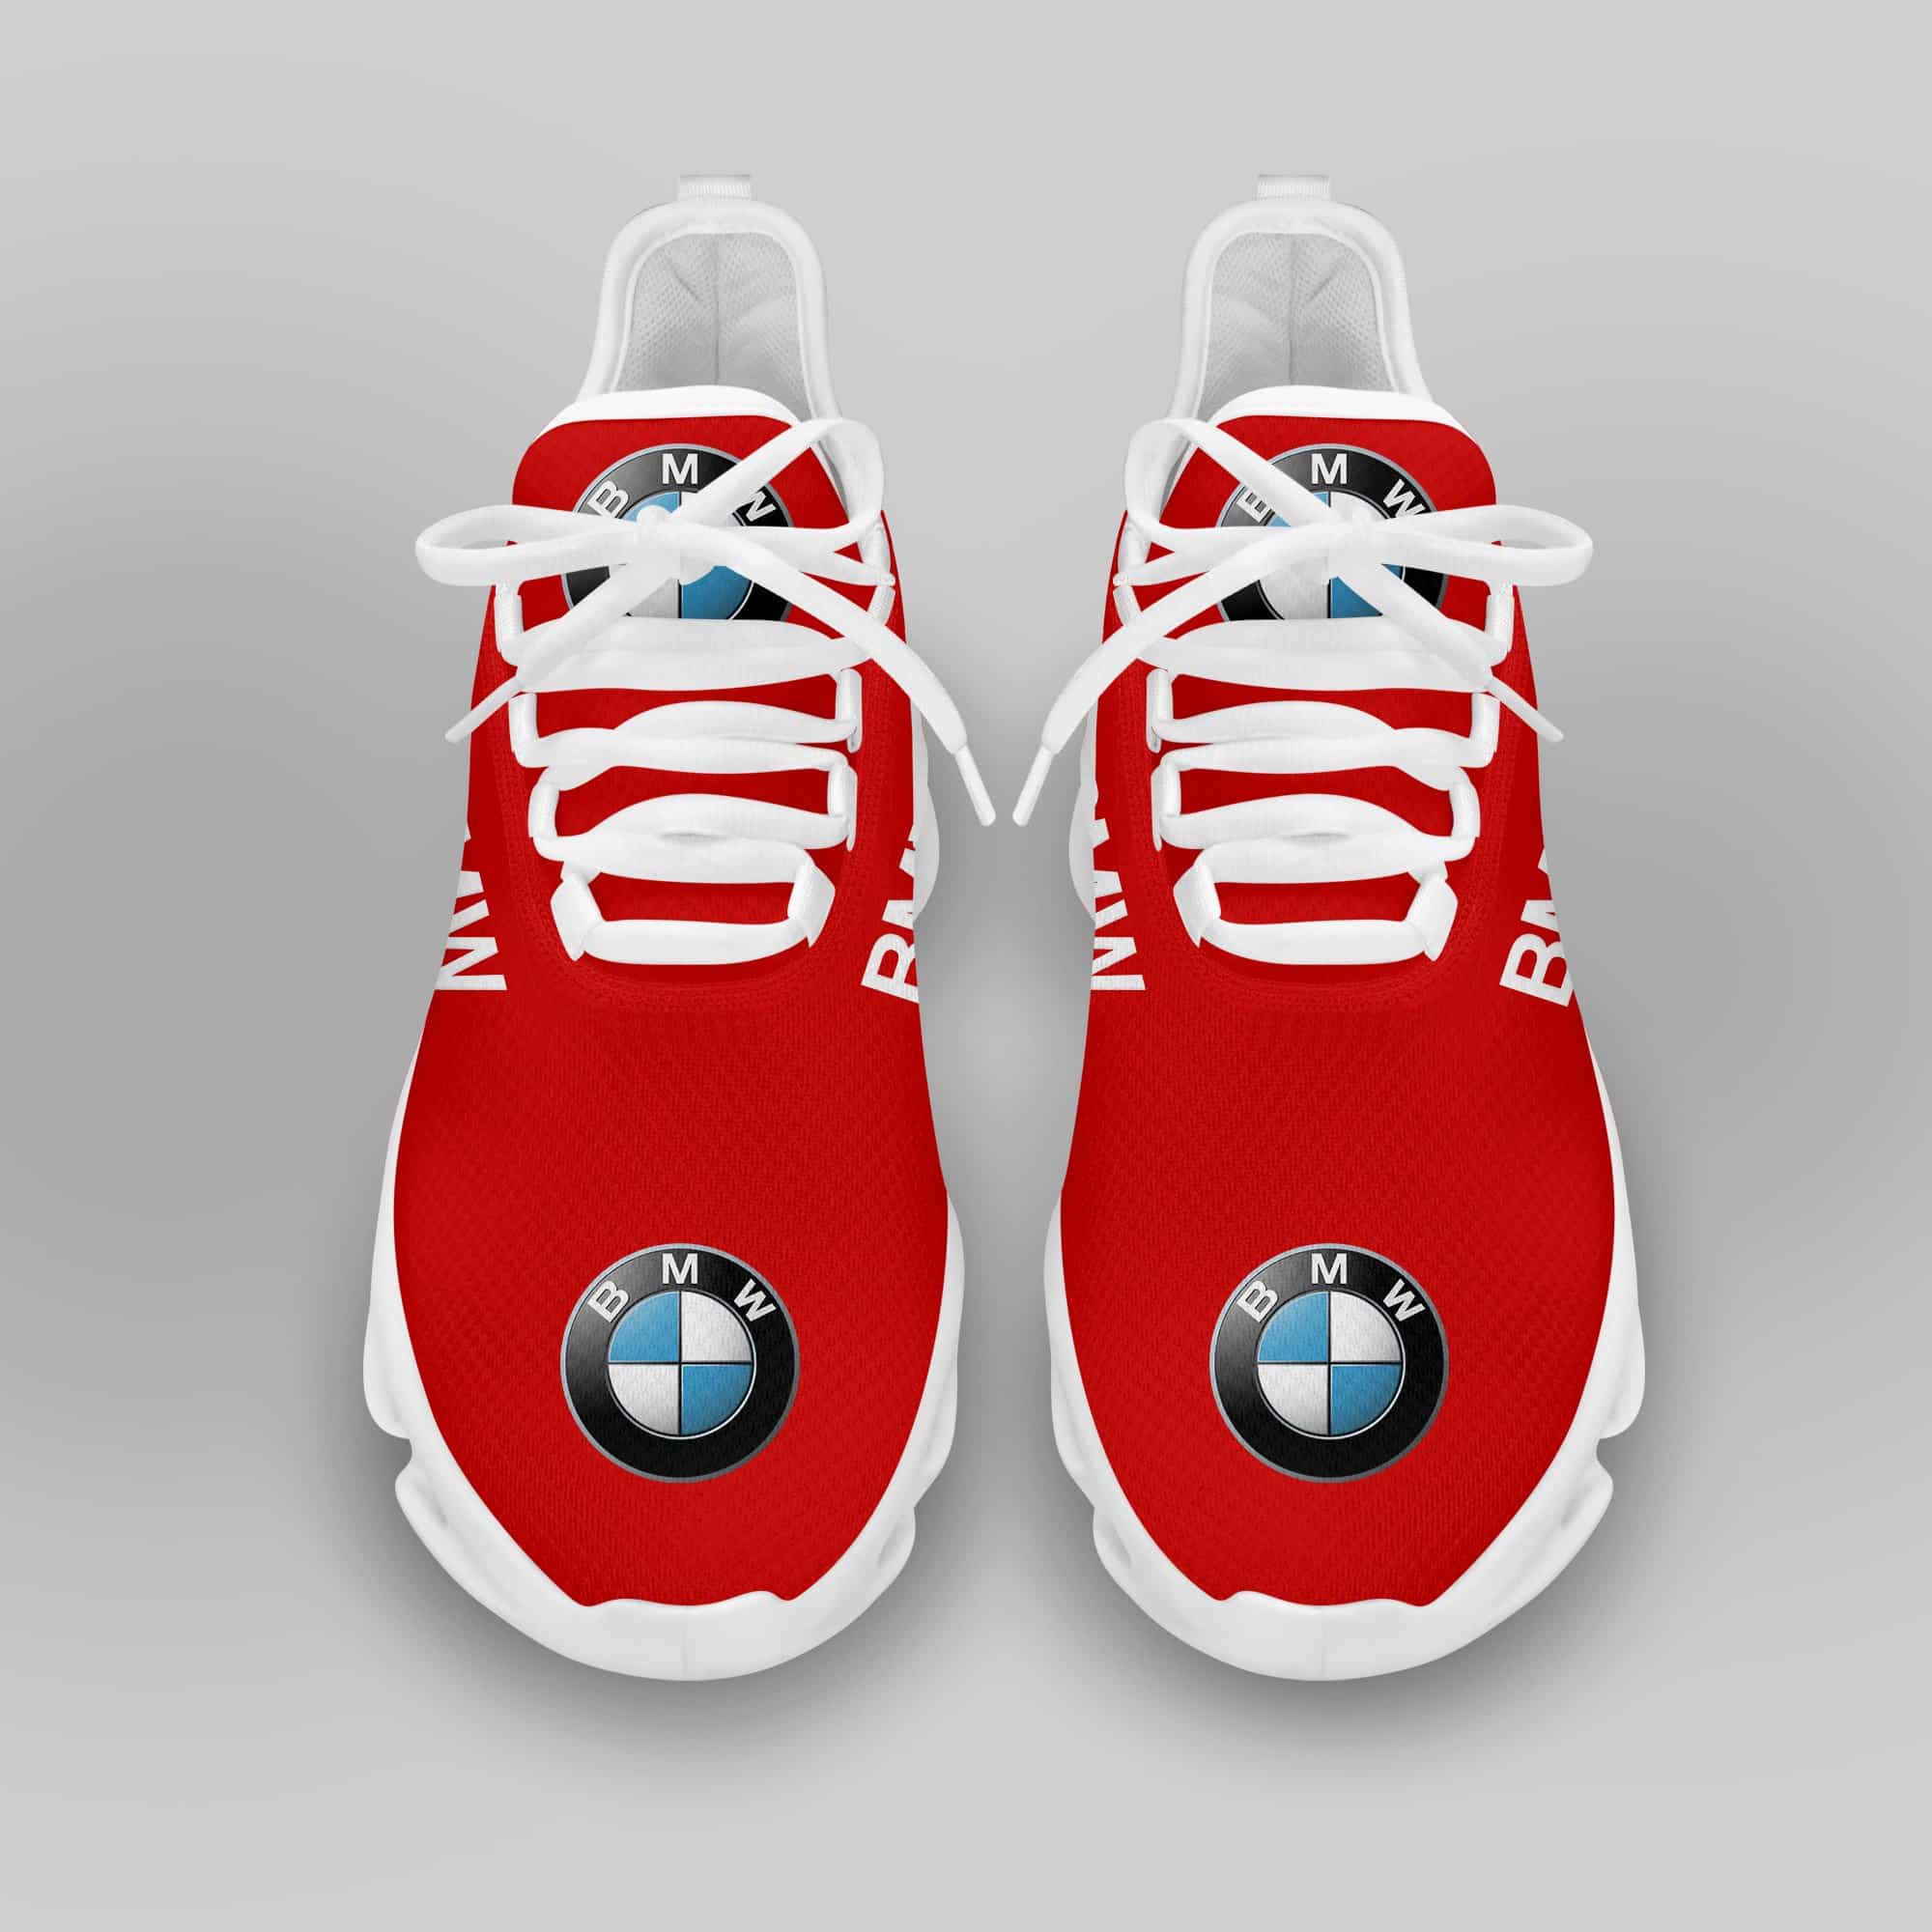 Bmw Running Shoes Max Soul Shoes Sneakers Ver 13 3